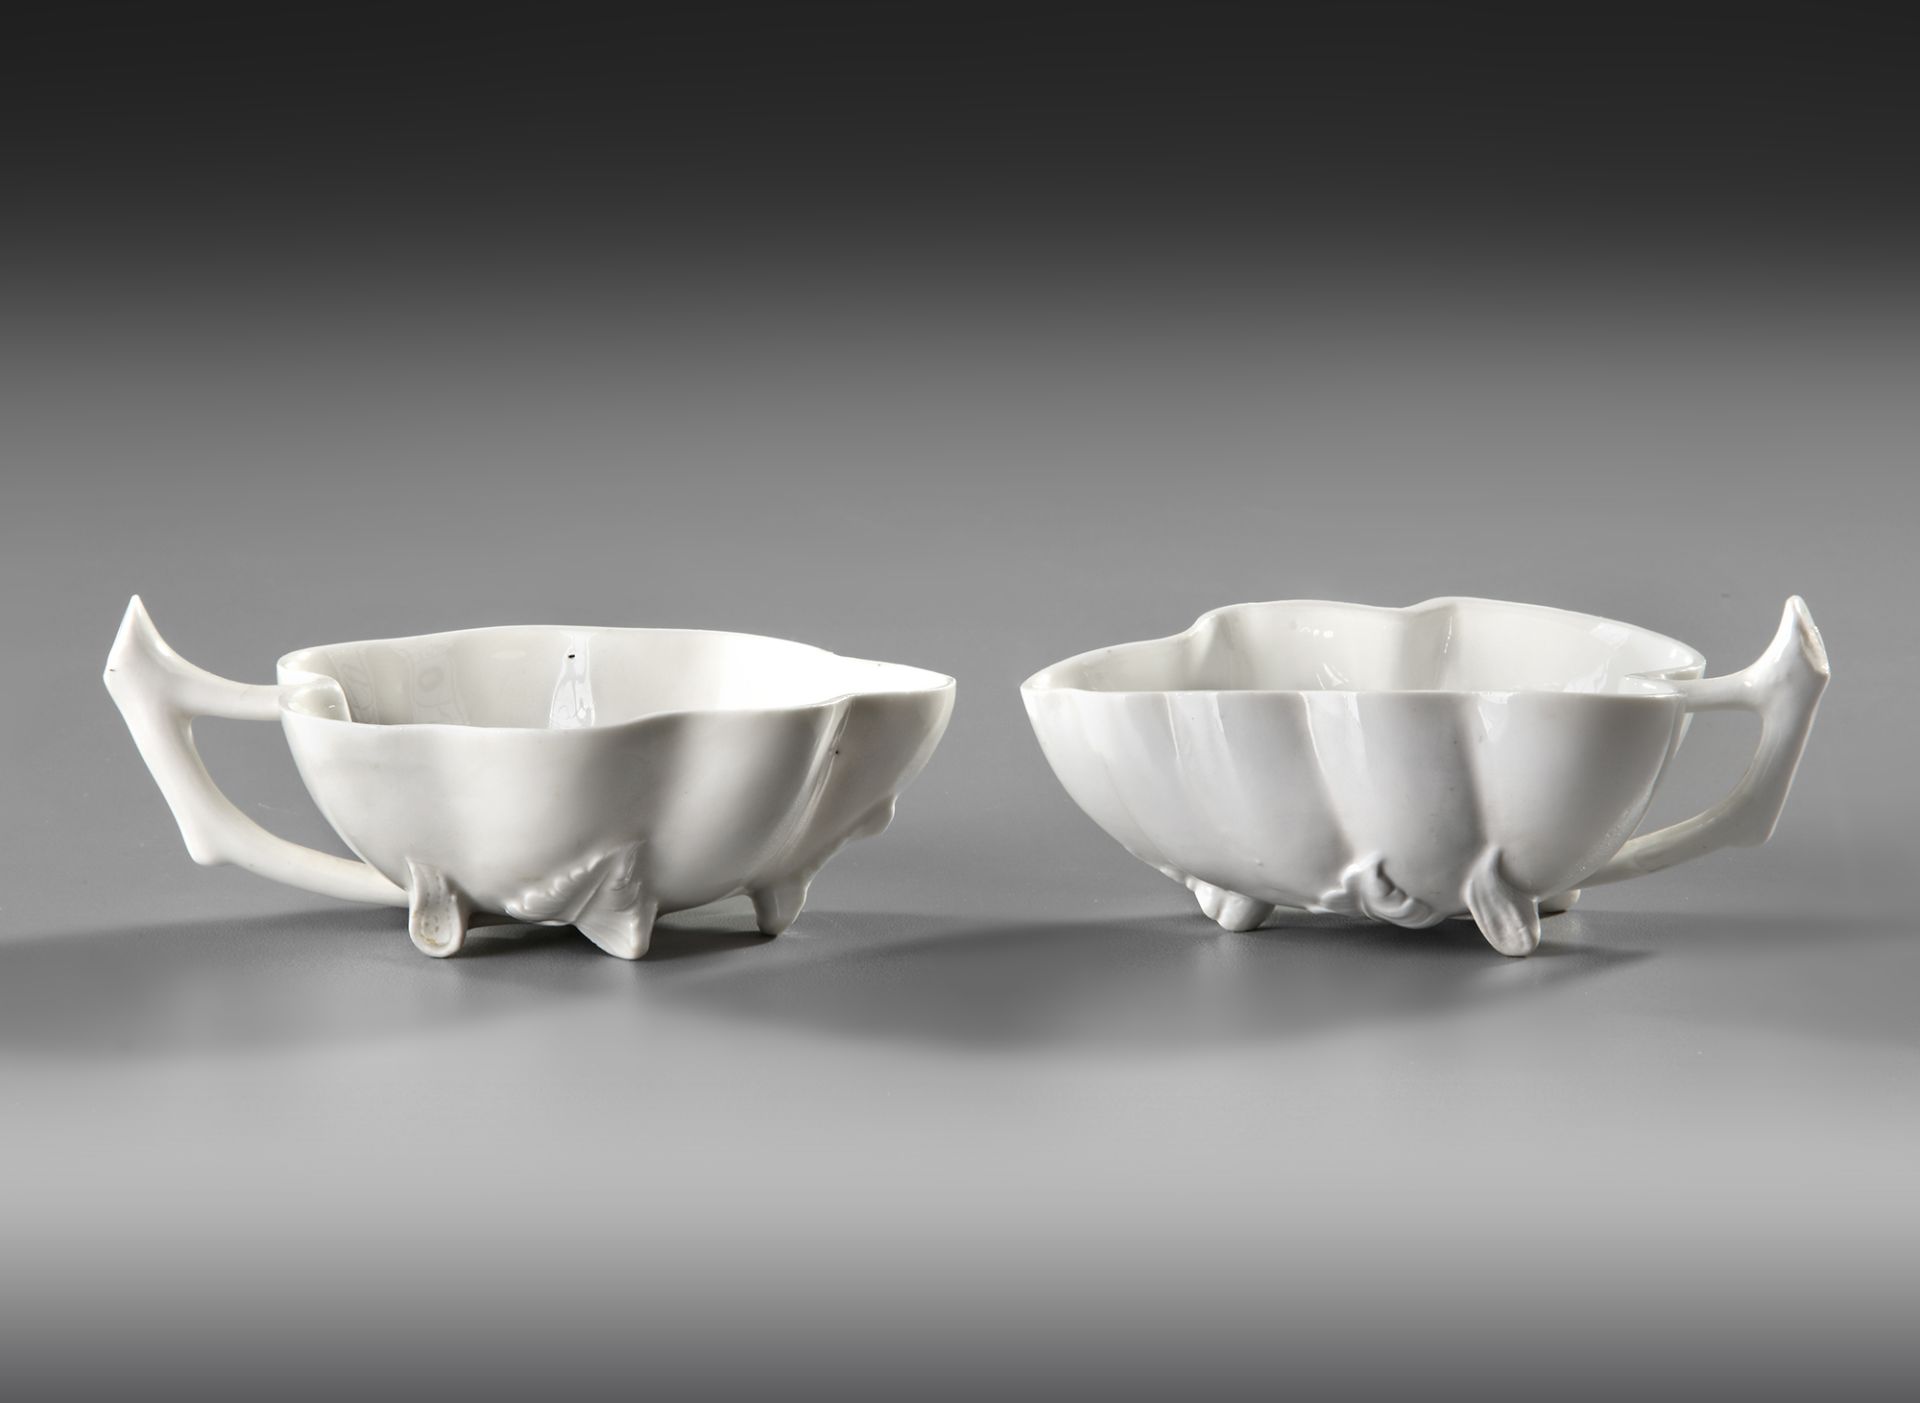 TWO CHINESE 'BLANC DE CHINE' LEAF-SHAPED CUPS, 17TH-18TH CENTURY - Image 2 of 4